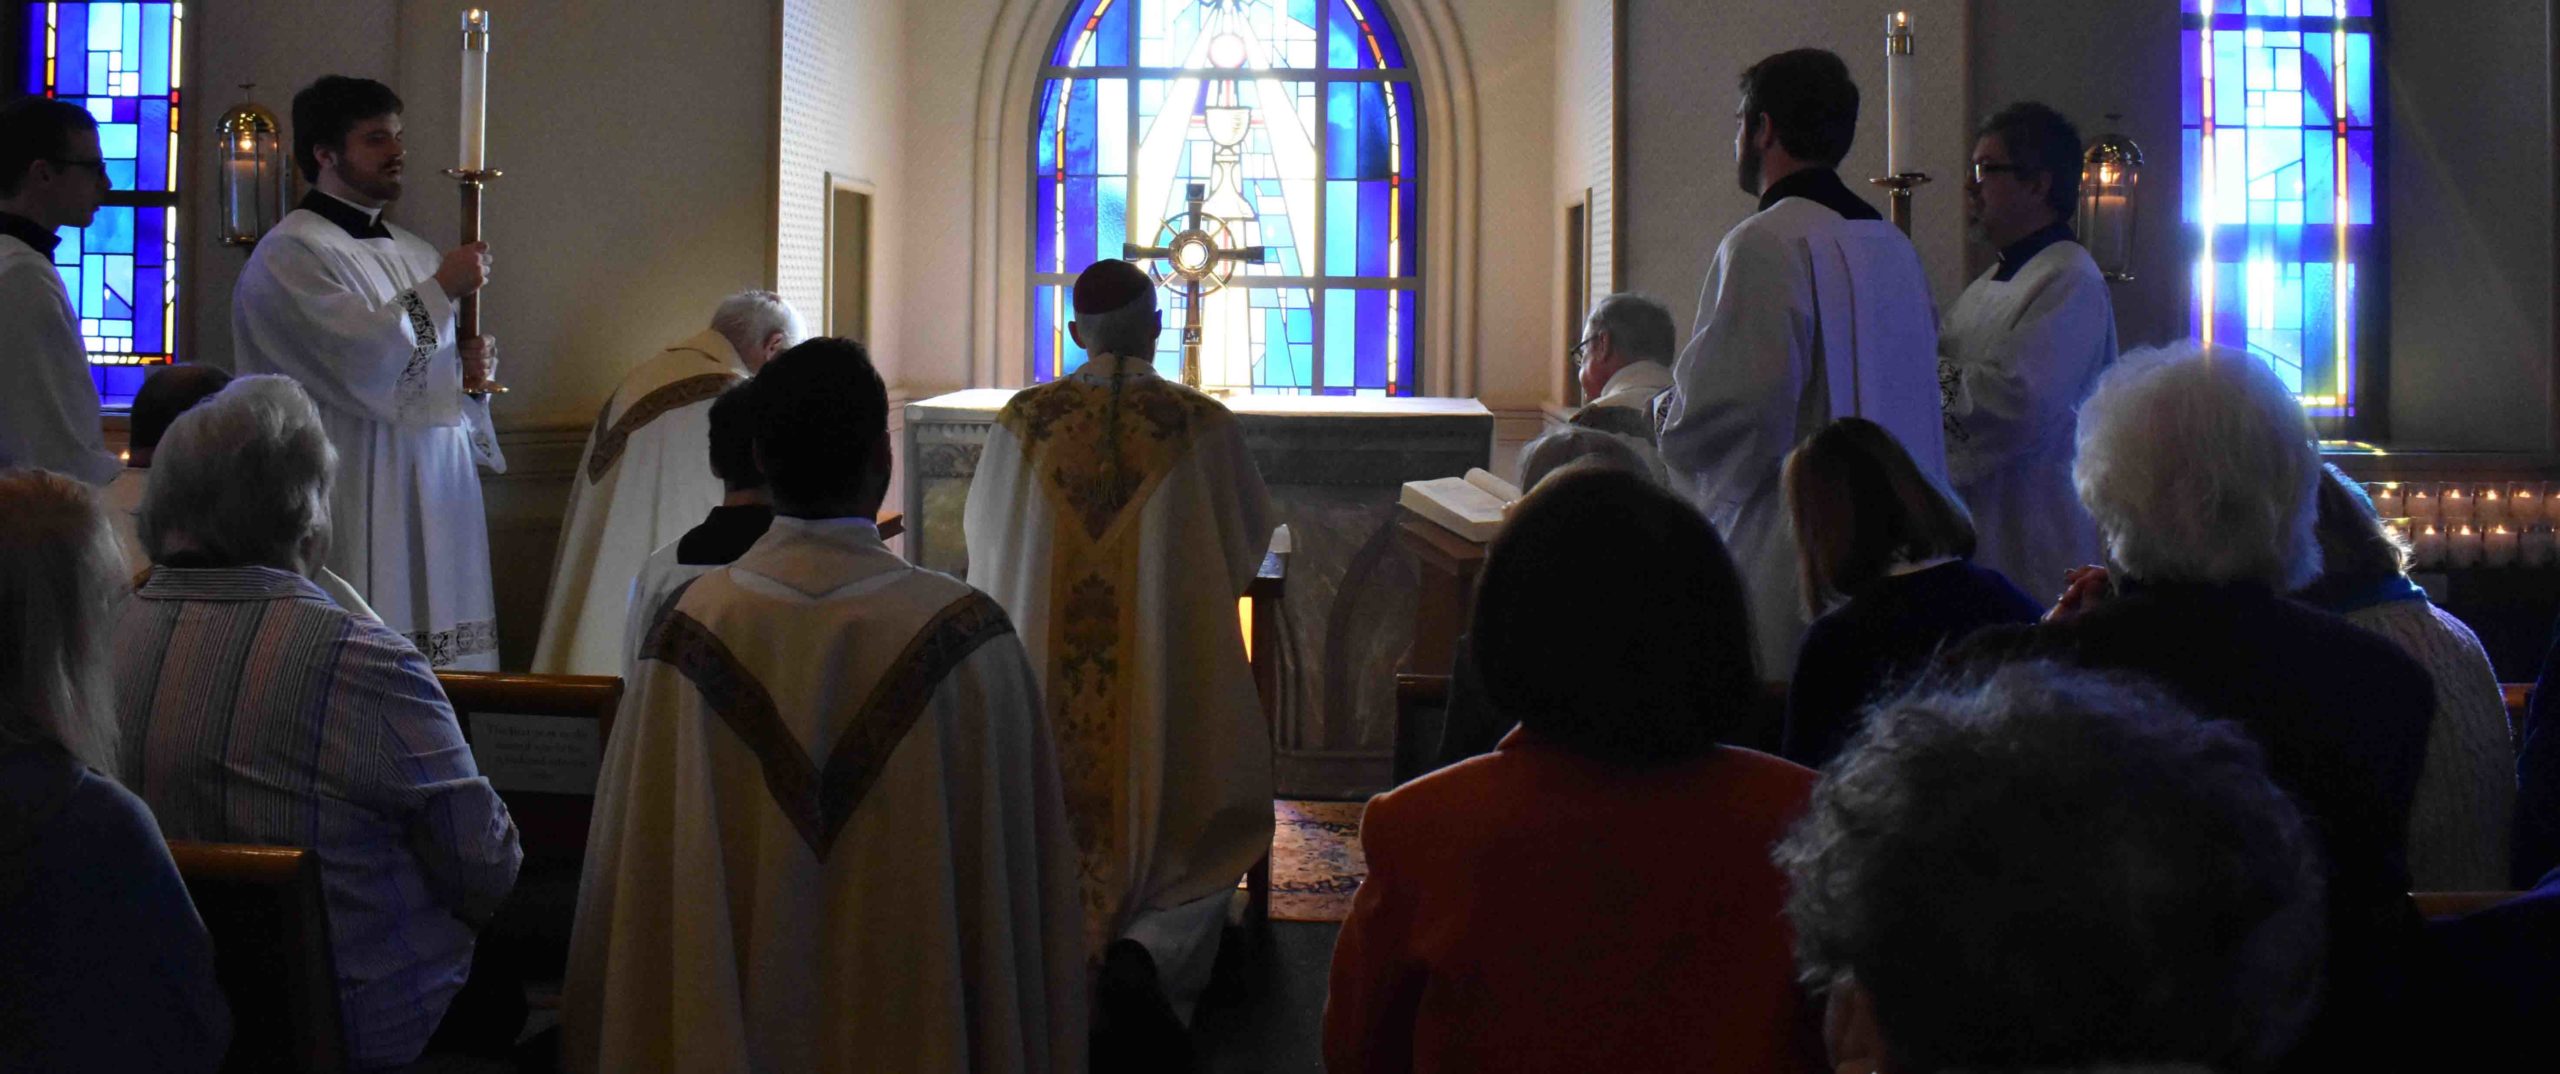 Adoration chapel in Towson celebrates 20 years of perpetual prayer